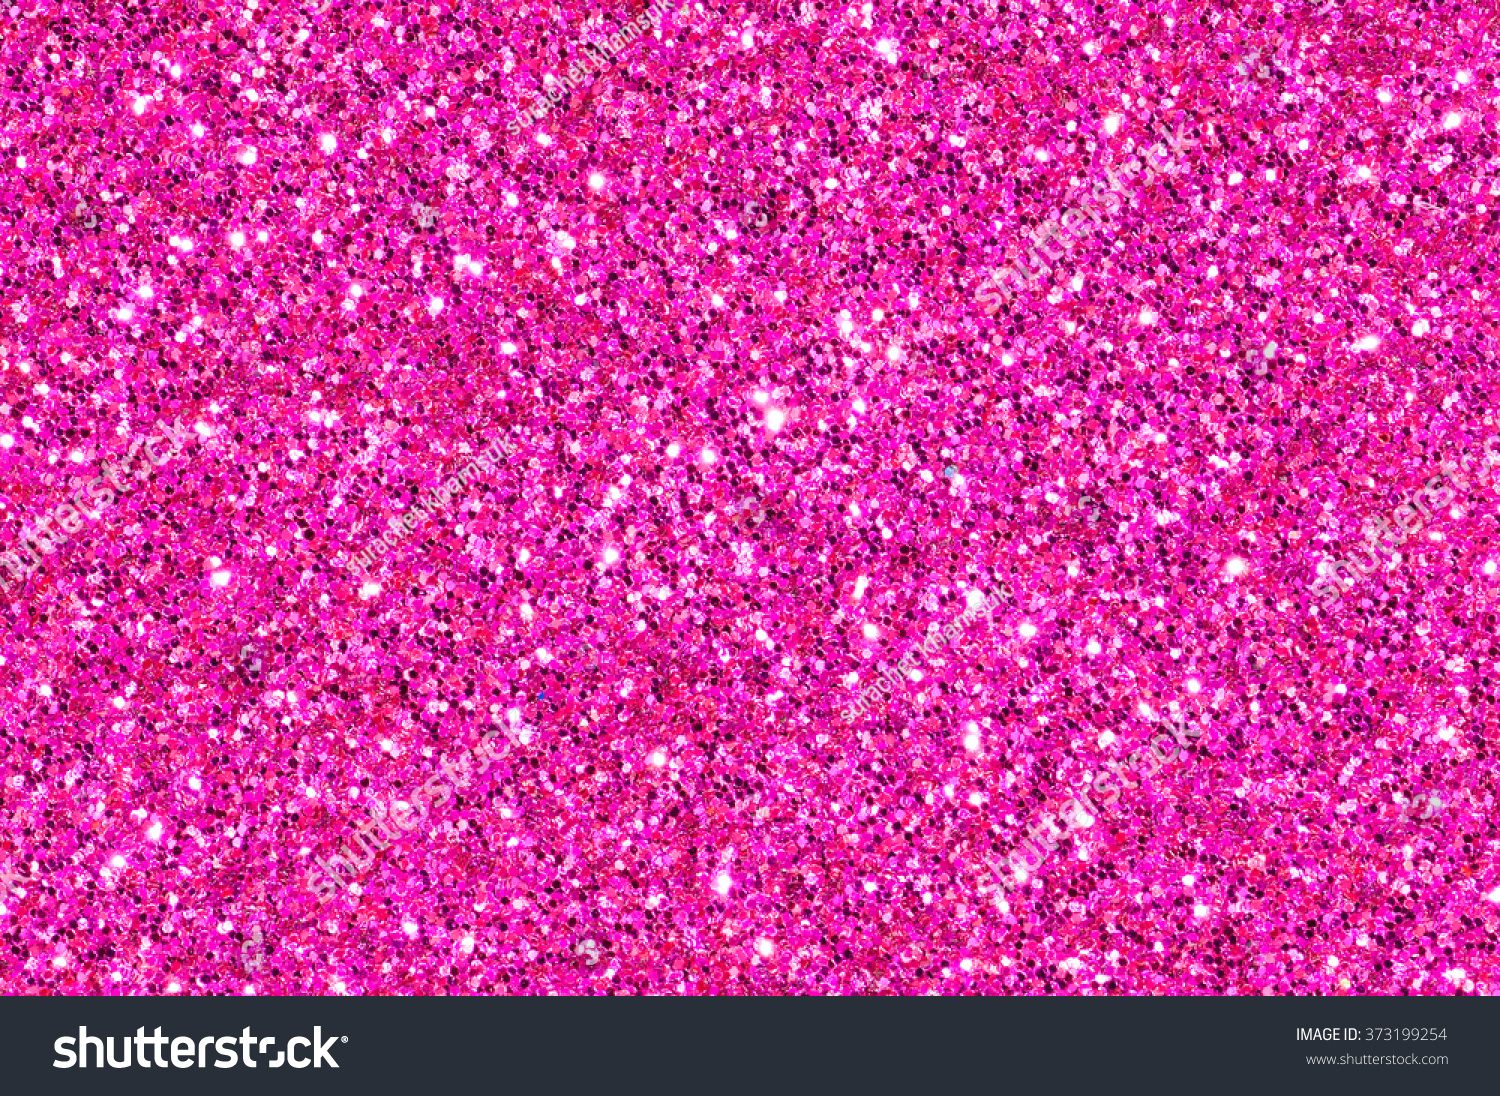 pink glitter texture christmas background #373199254